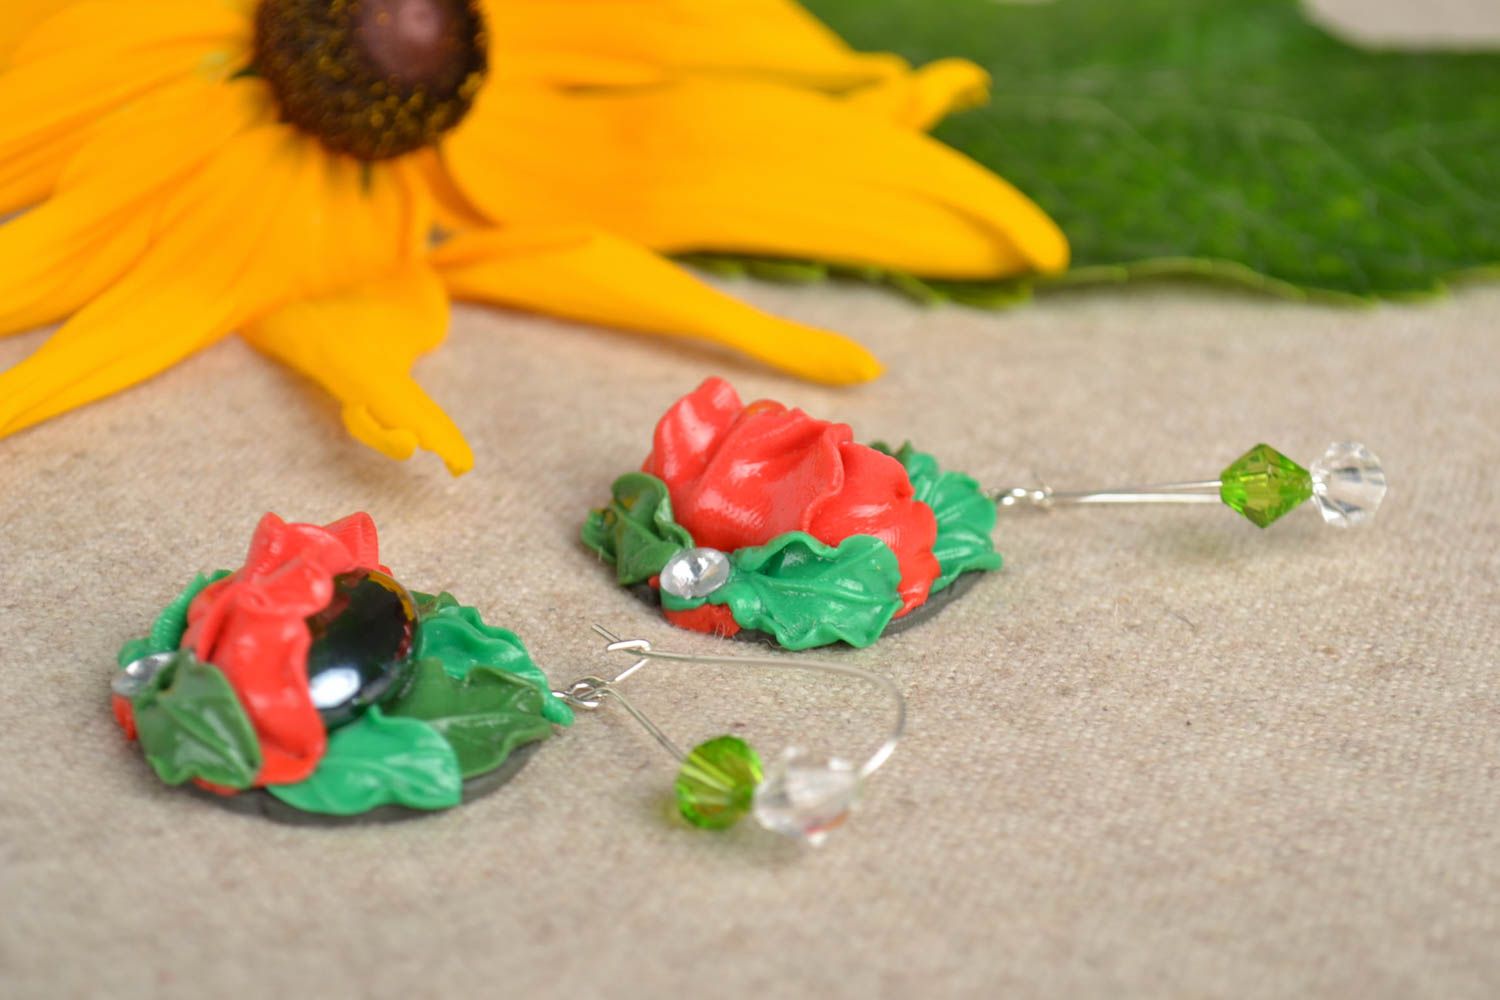 Handcrafted jewelry cool earrings flower earrings designer jewelry polymer clay photo 1